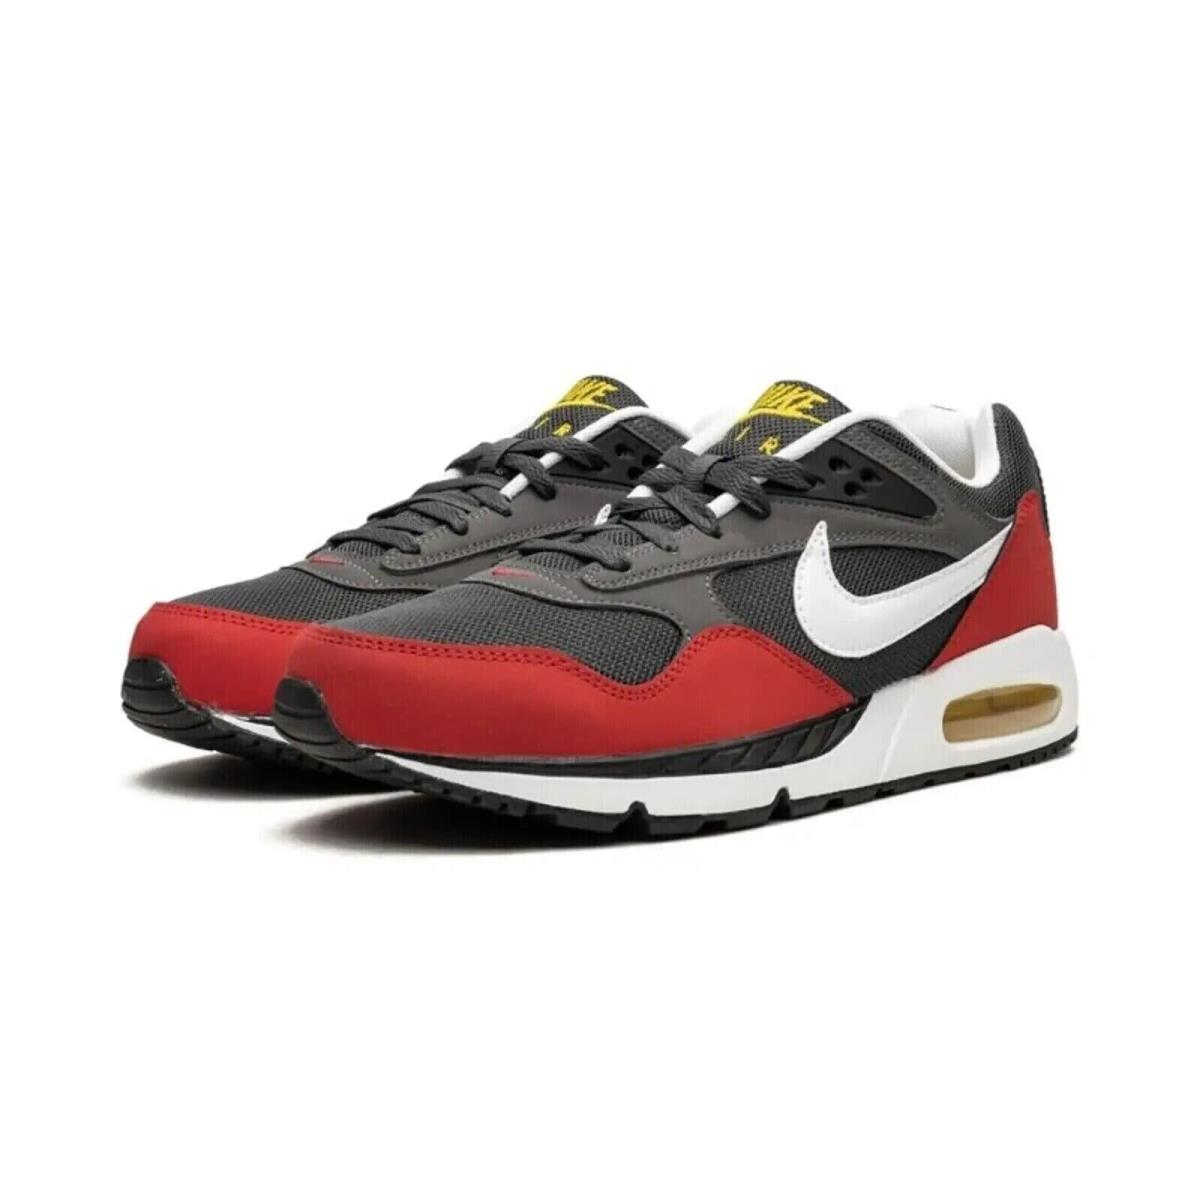 Nike Air Max Correlate 511416-016 Men`s Multicolor Low Top Running Shoes HHH105 - Red White Black